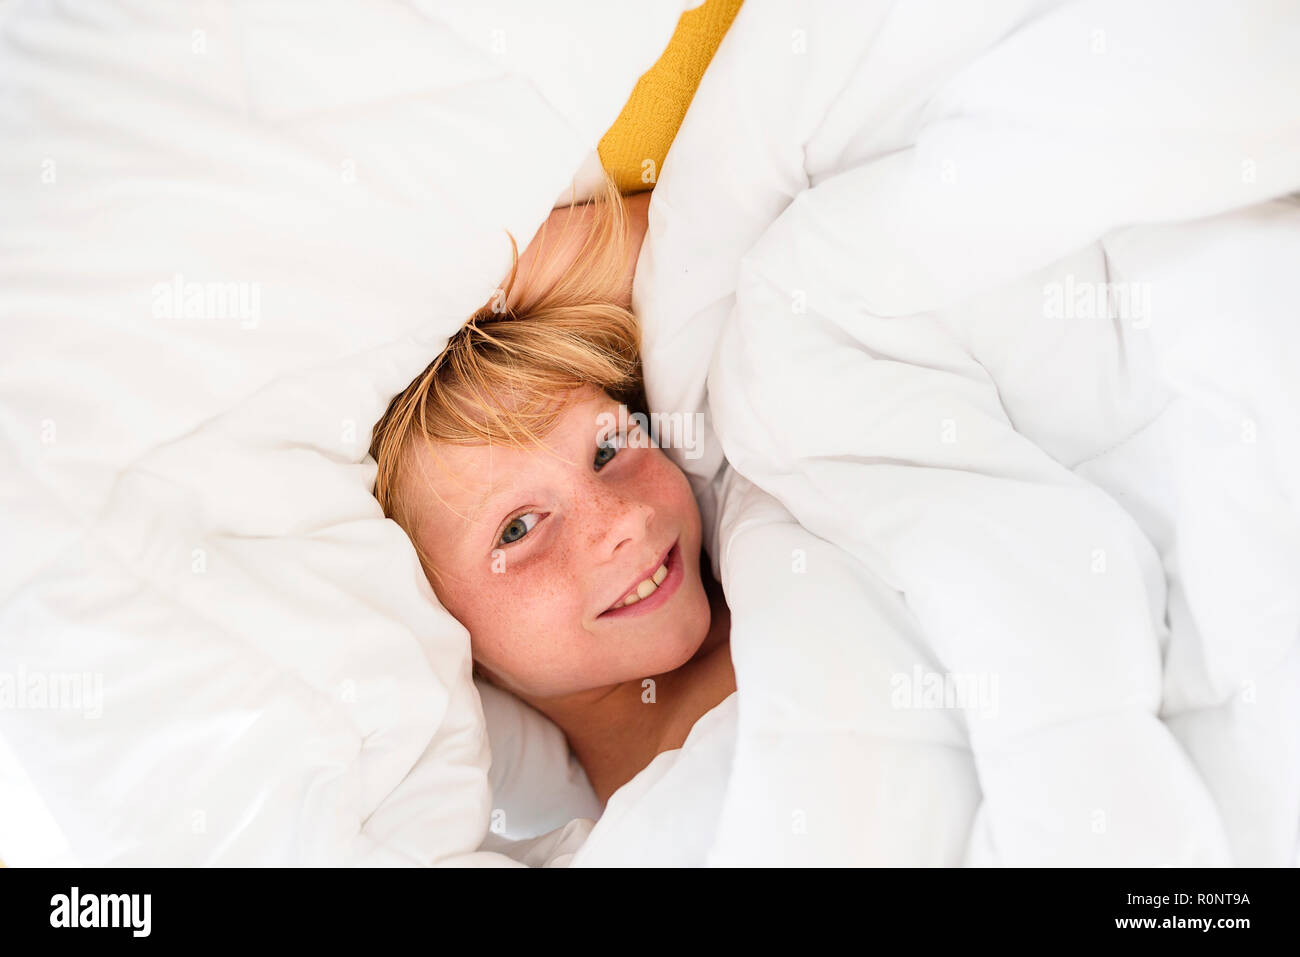 Overhead view of a smiling boy lying in bed Stock Photo